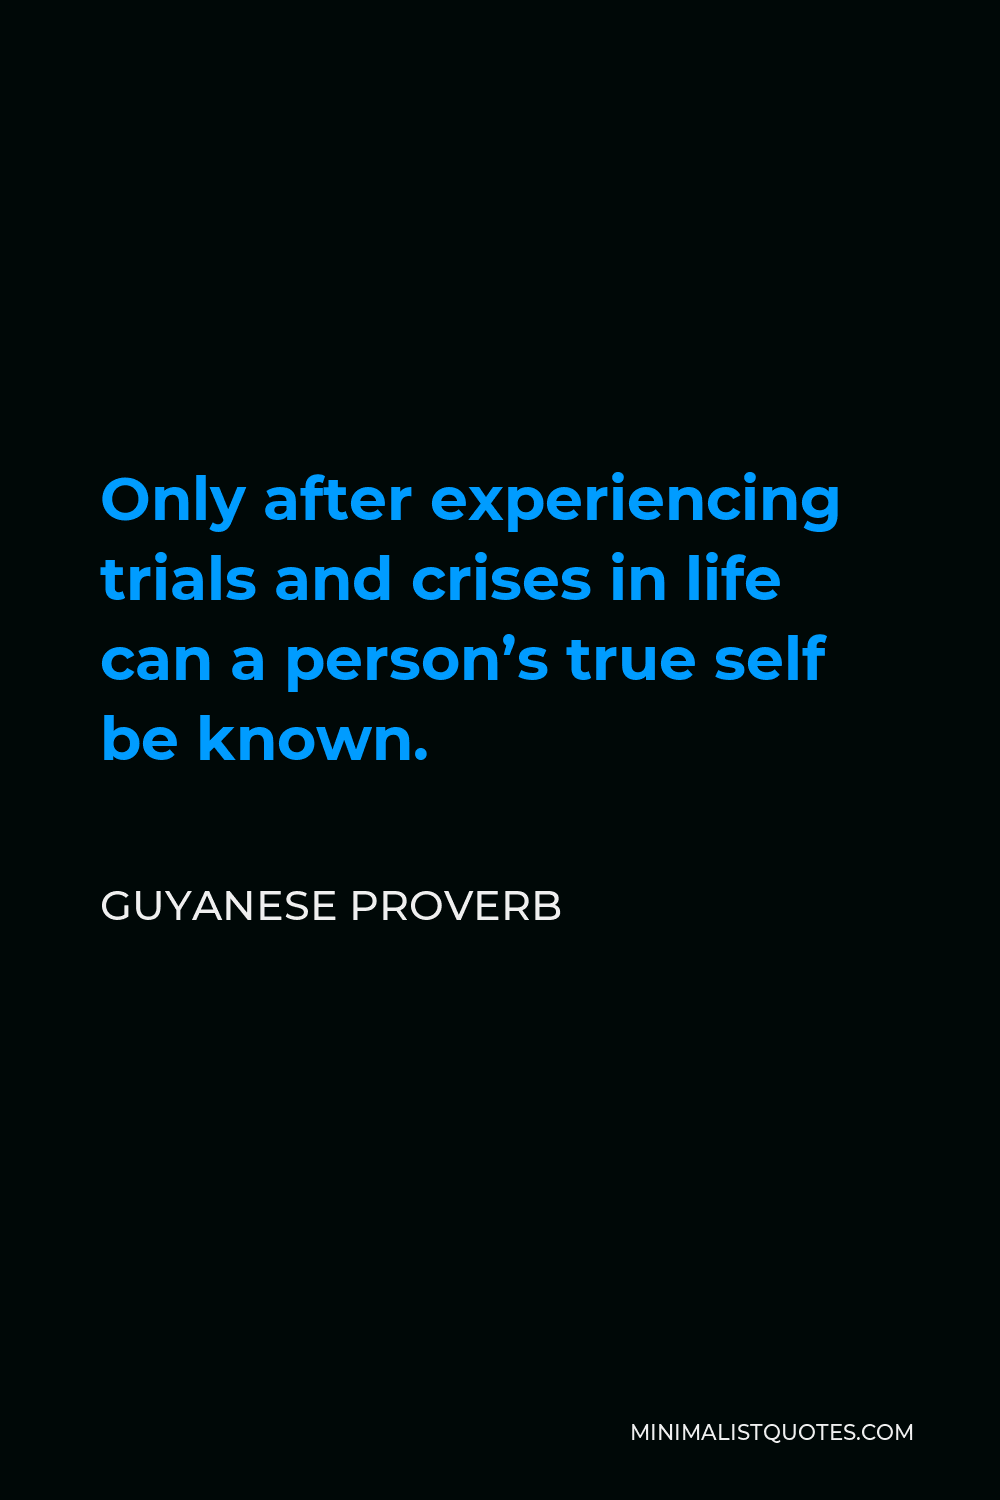 Guyanese Proverb Quote - Only after experiencing trials and crises in life can a person’s true self be known.